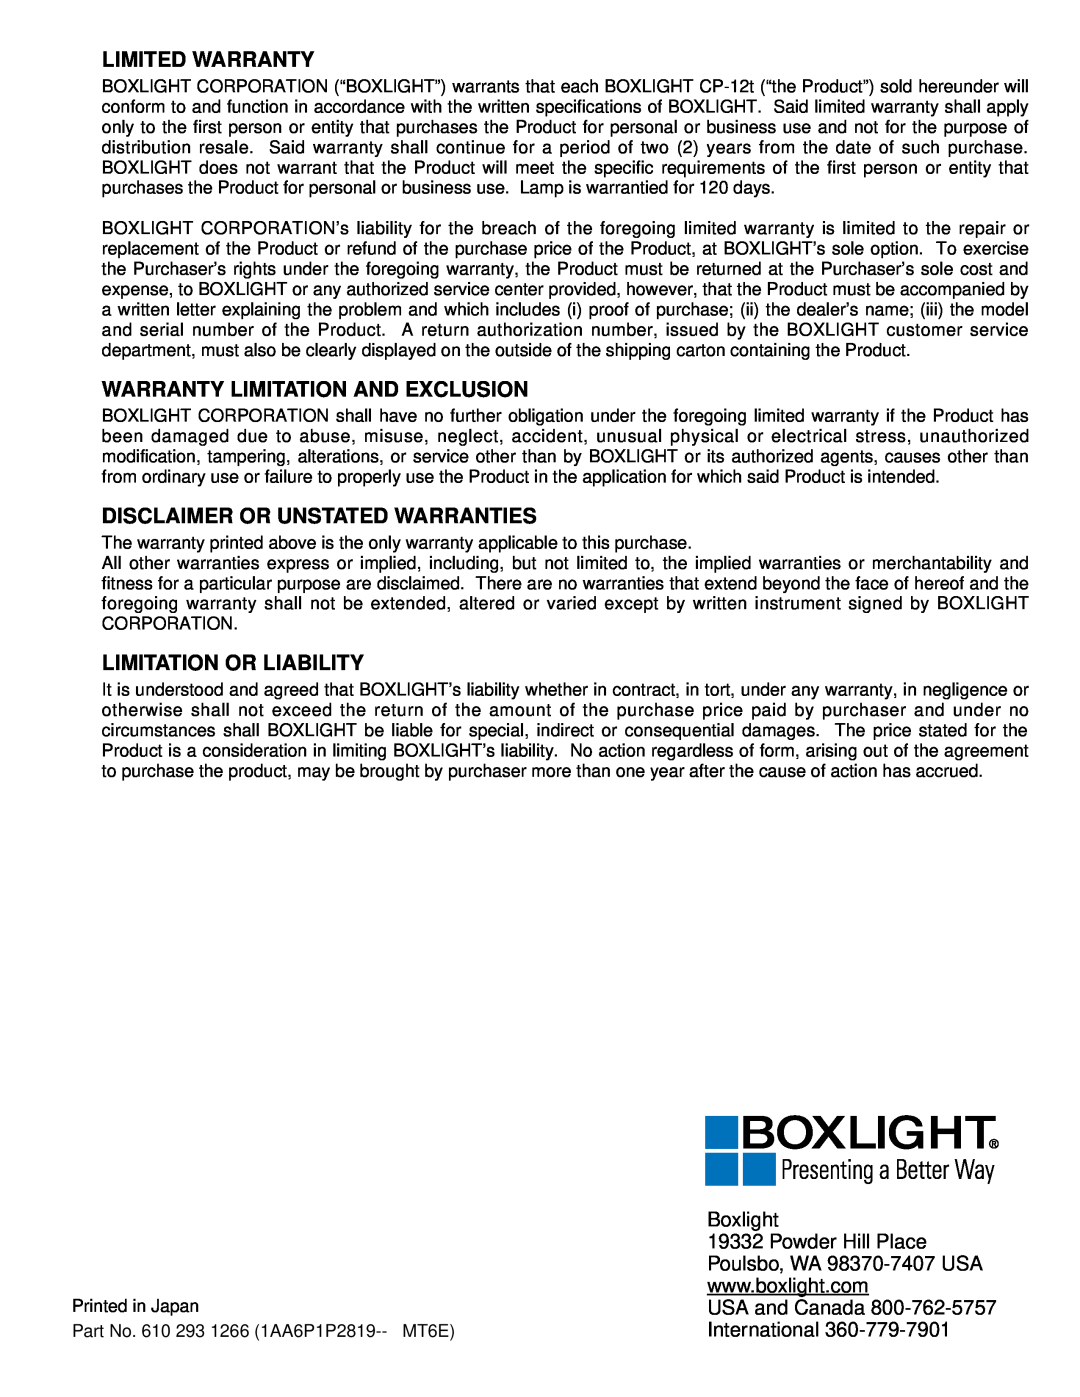 BOXLIGHT cp-12t manual Limited Warranty, Warranty Limitation And Exclusion, Disclaimer Or Unstated Warranties, Boxlight 